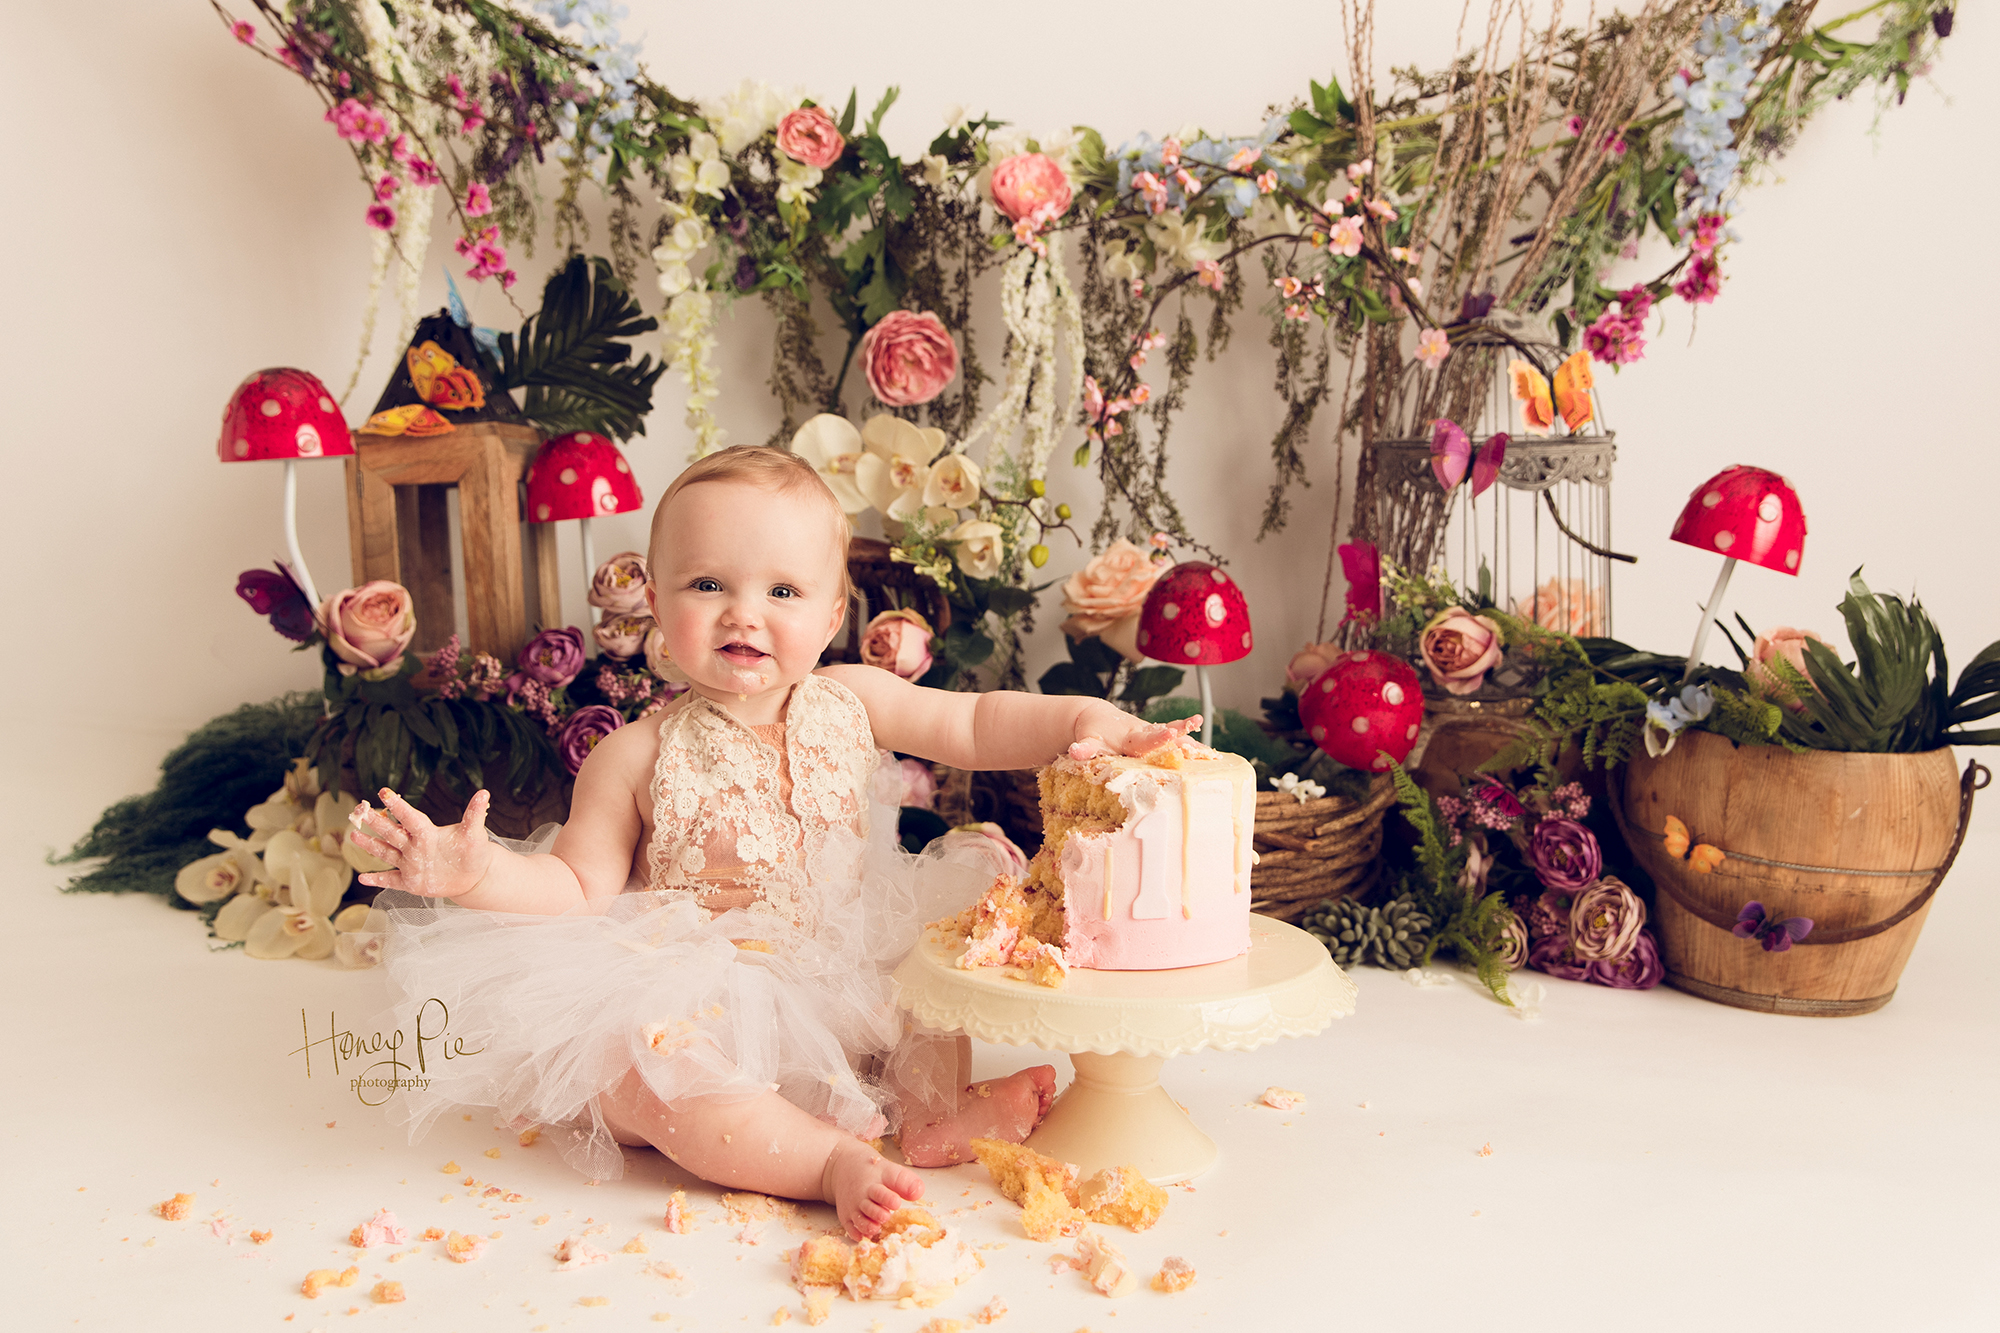 Baby in a fairy garden with toadstools, flowers & lanterns smashing her first birthday cake